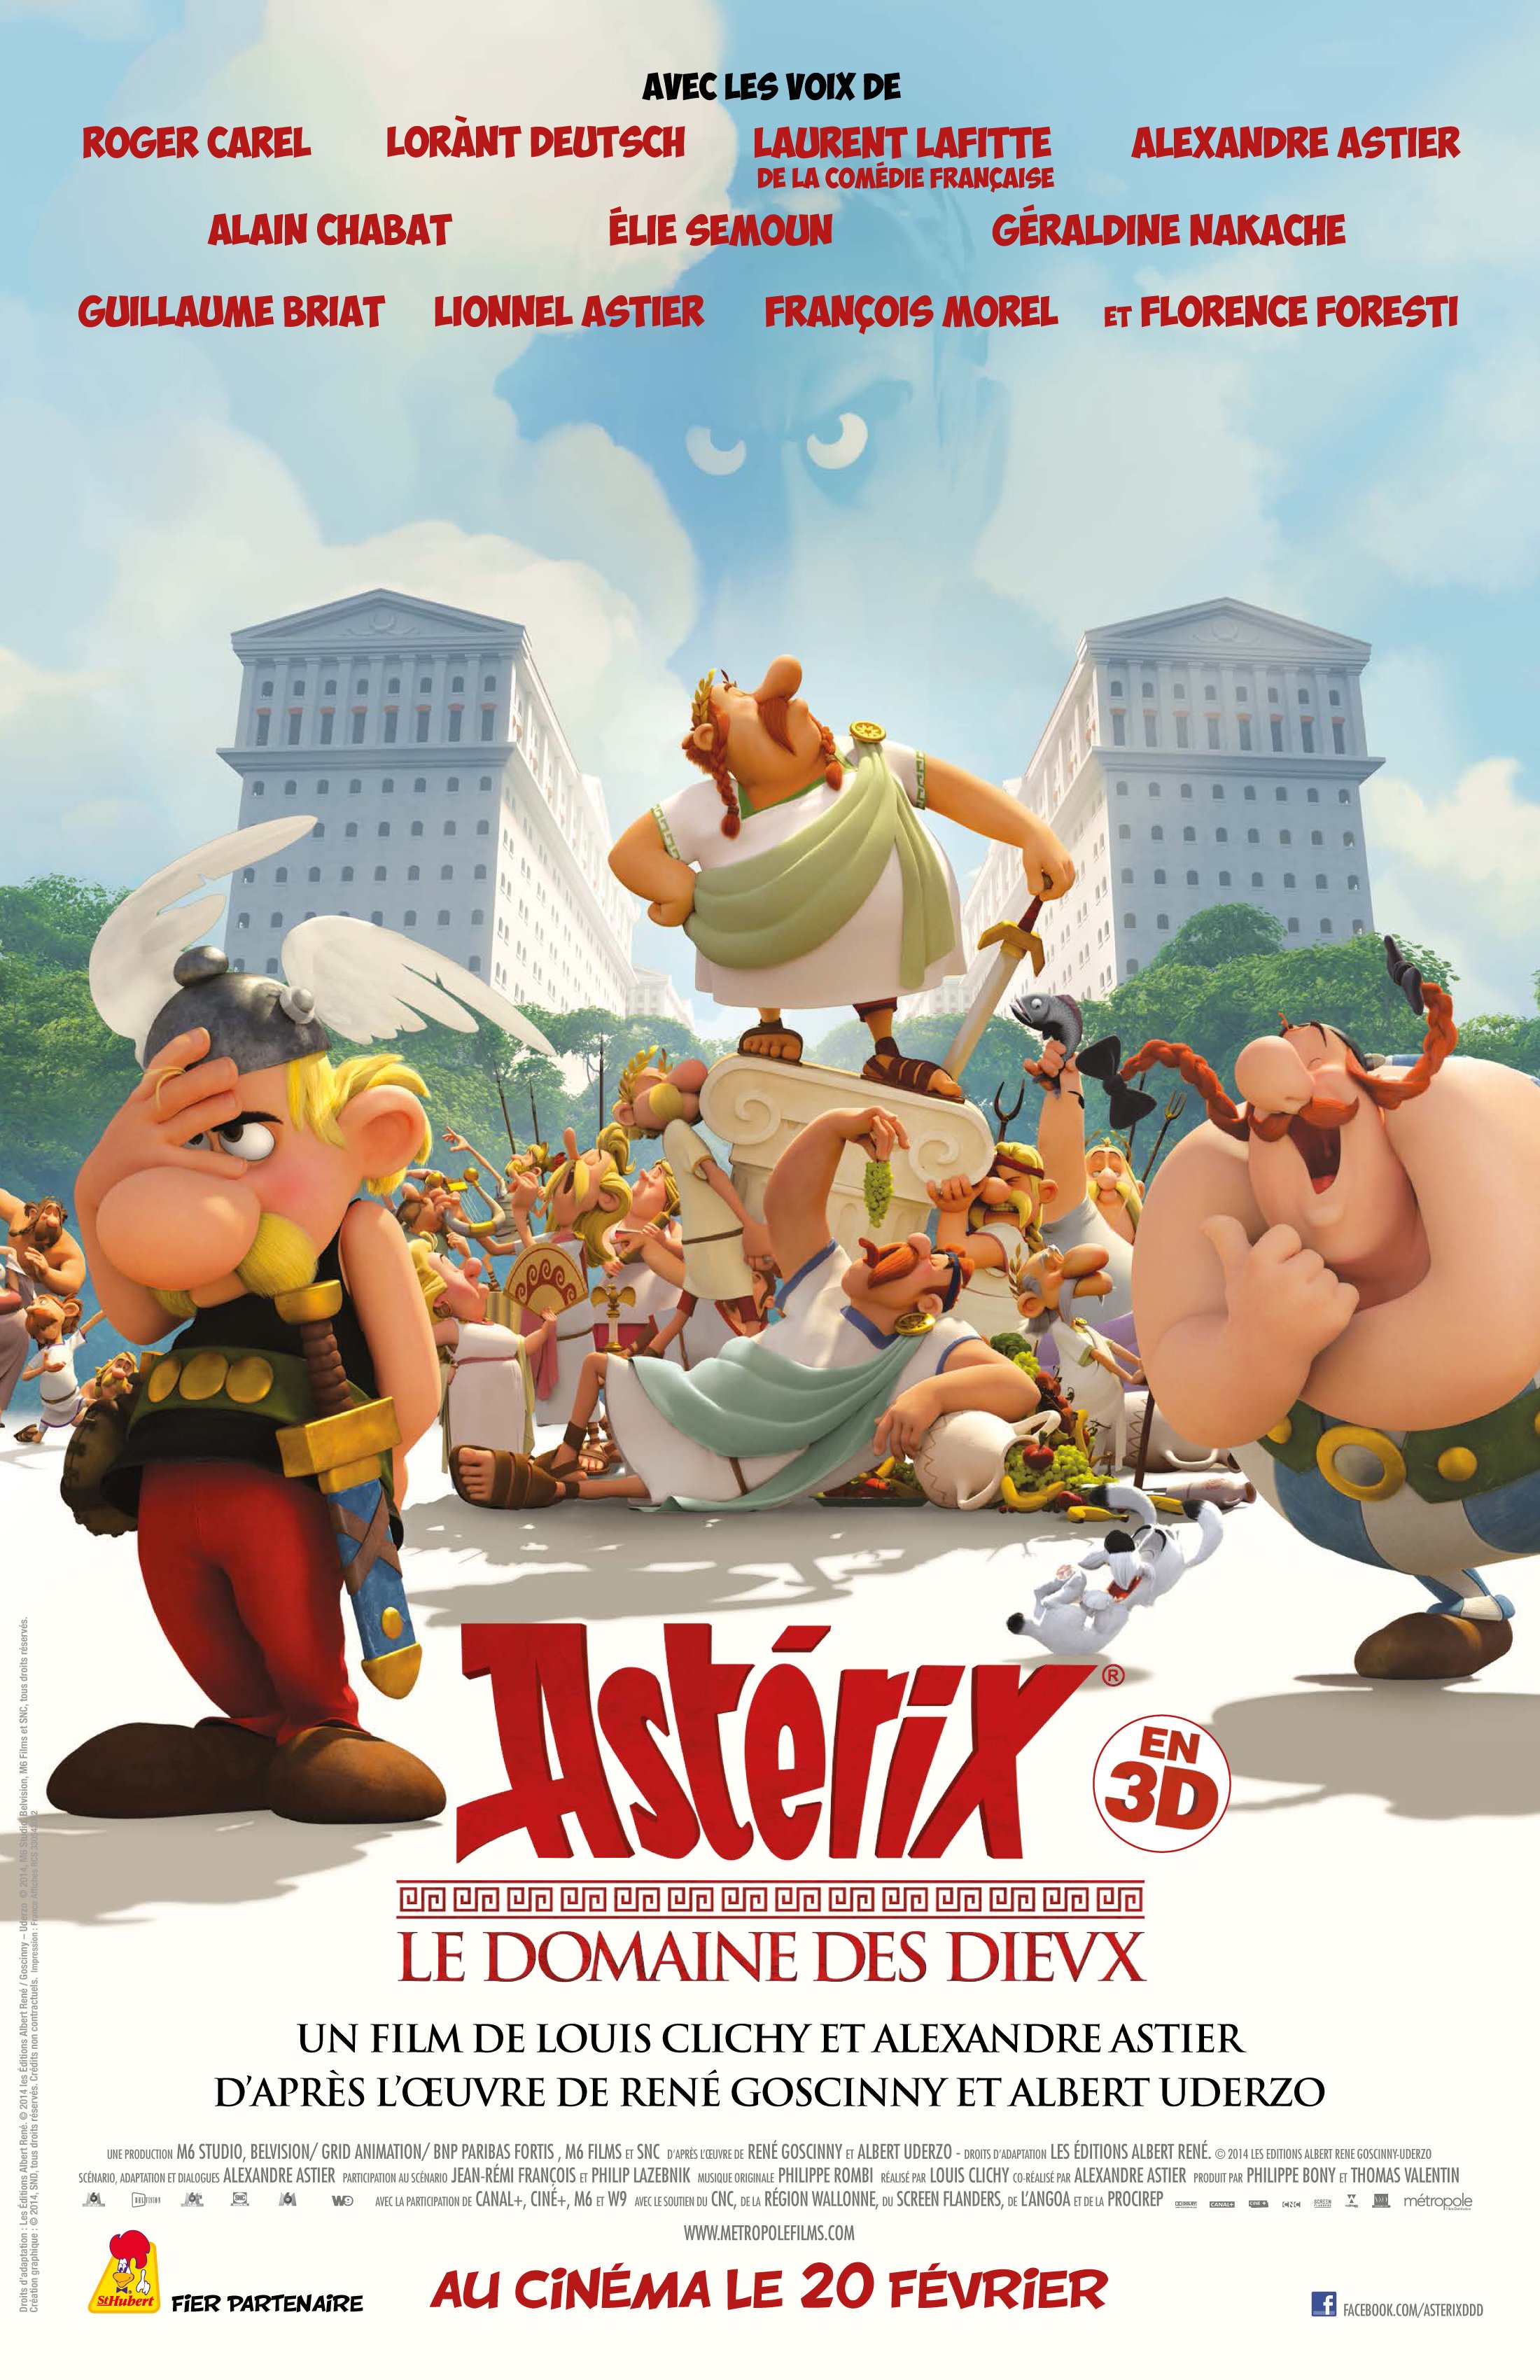 Poster of the movie Asterix: The Mansions of the Gods